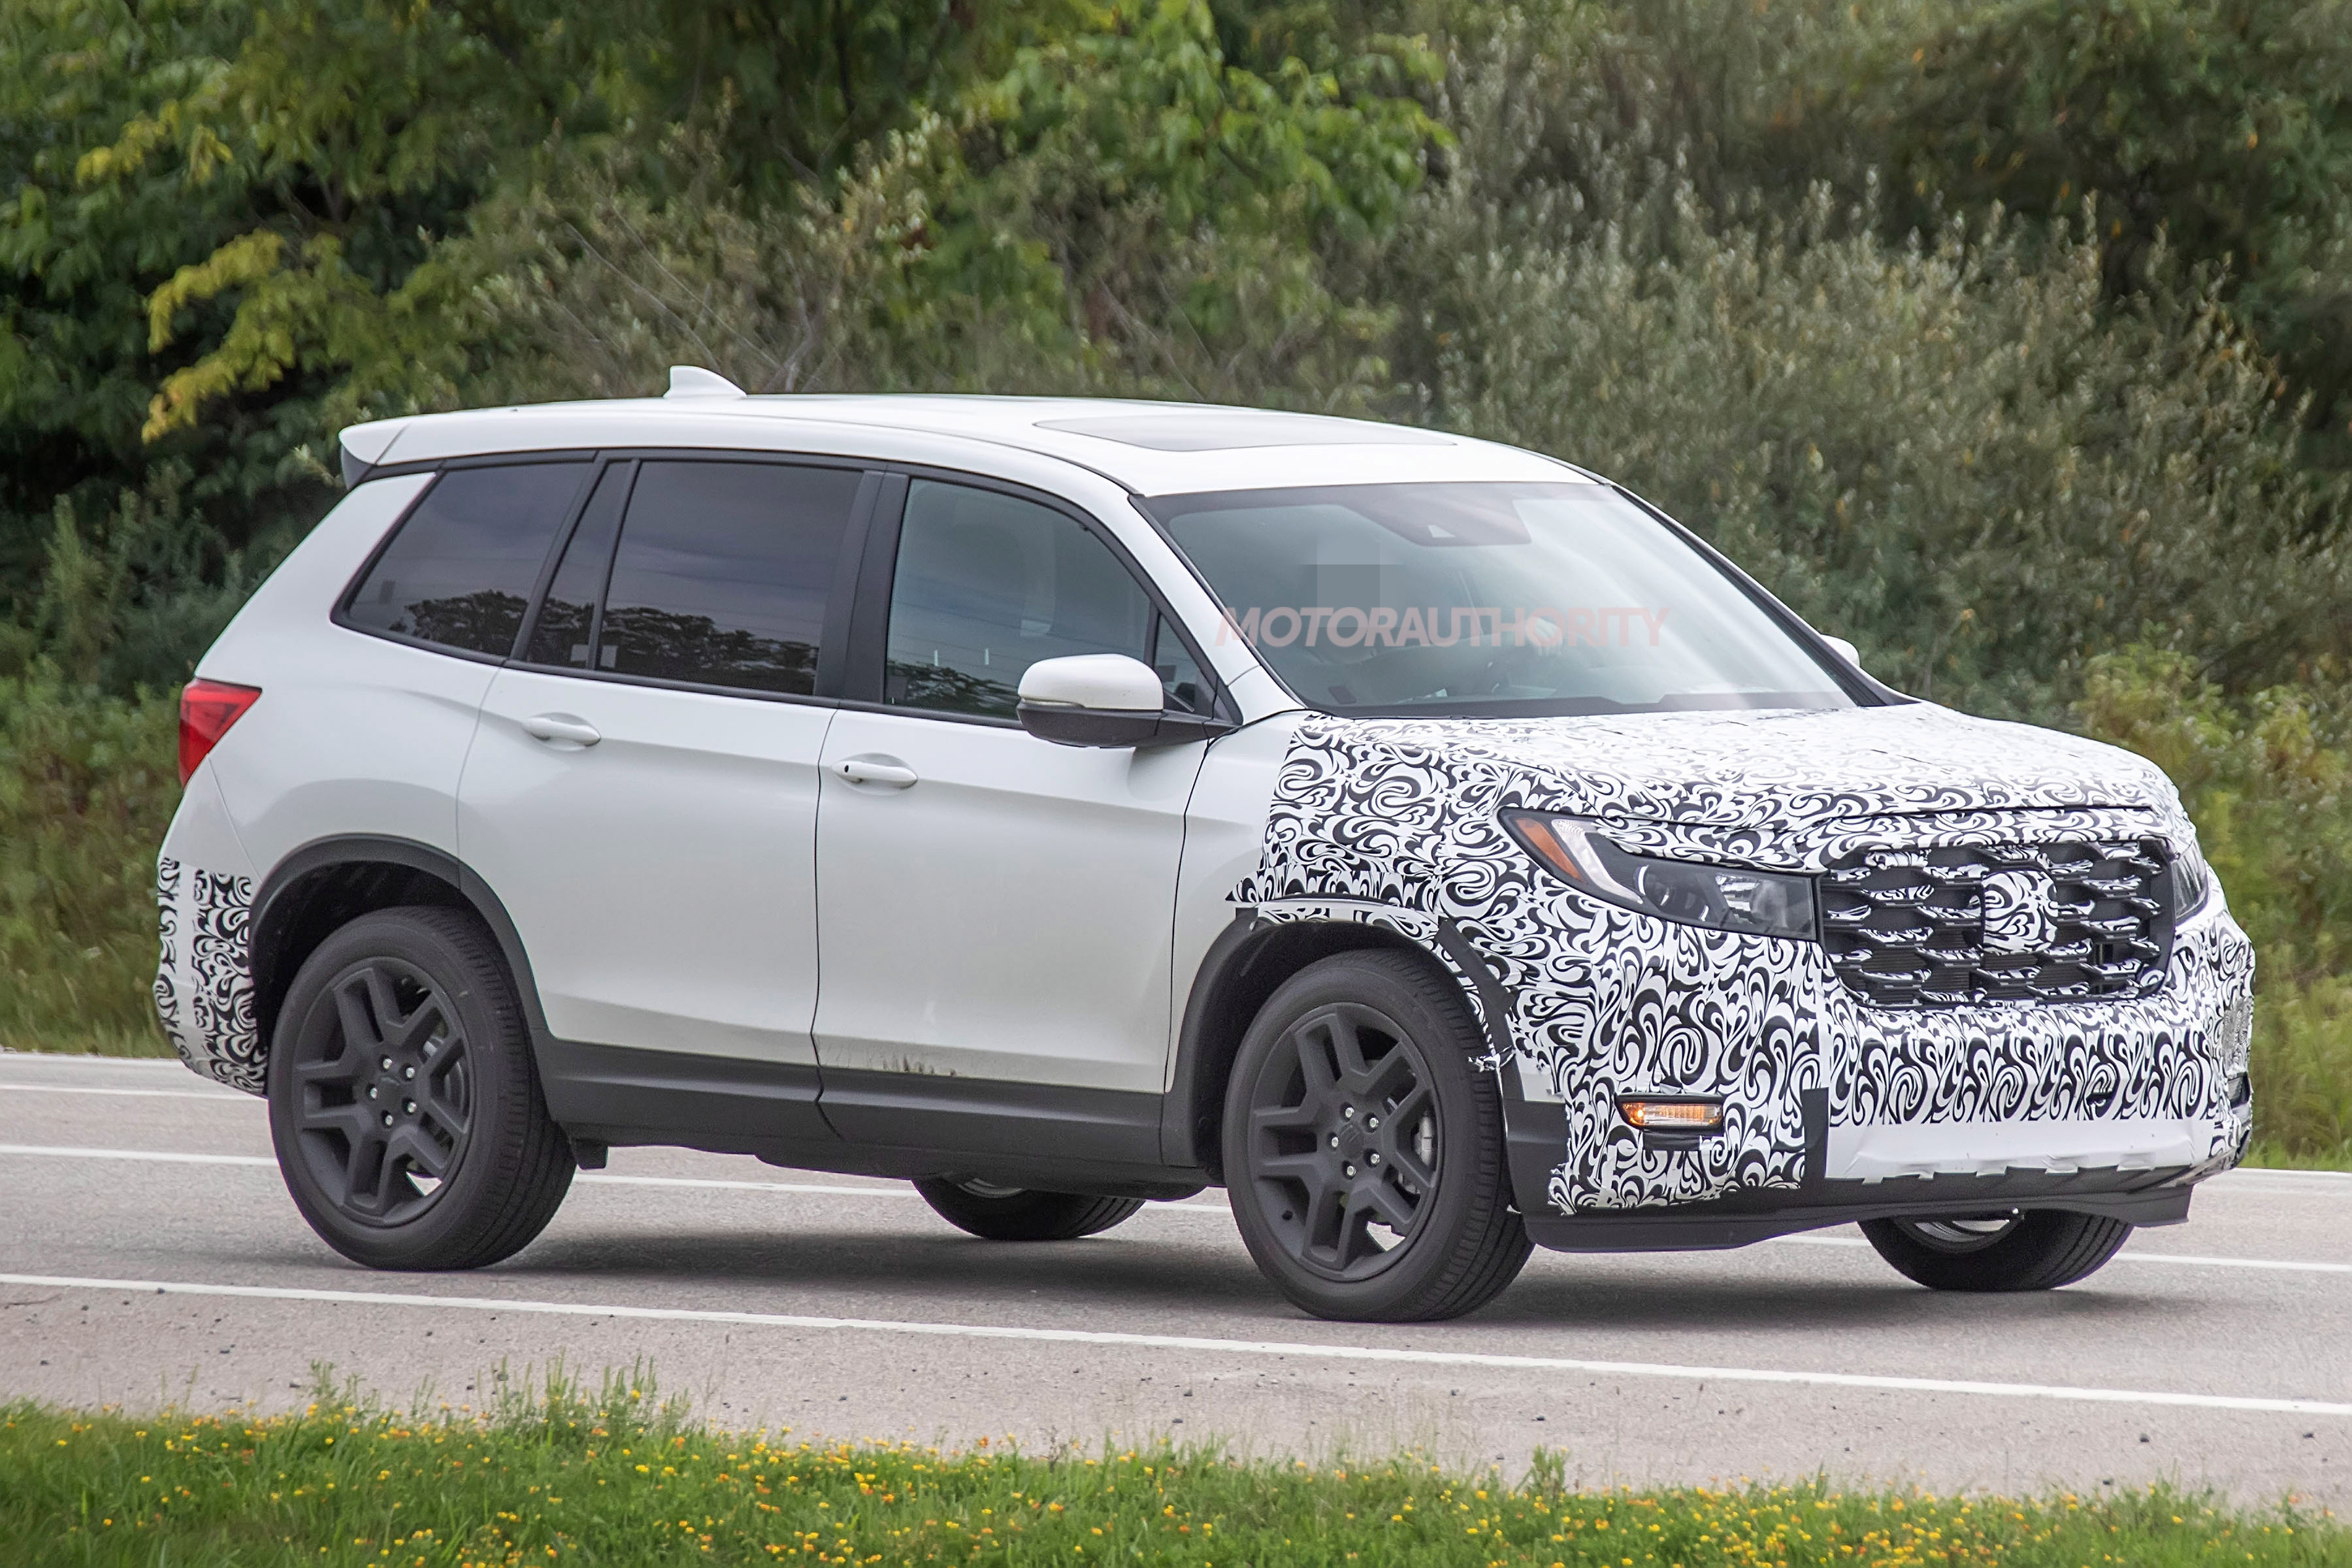 2022 Honda Passport spy shots: Family crossover wants to be rugged looking